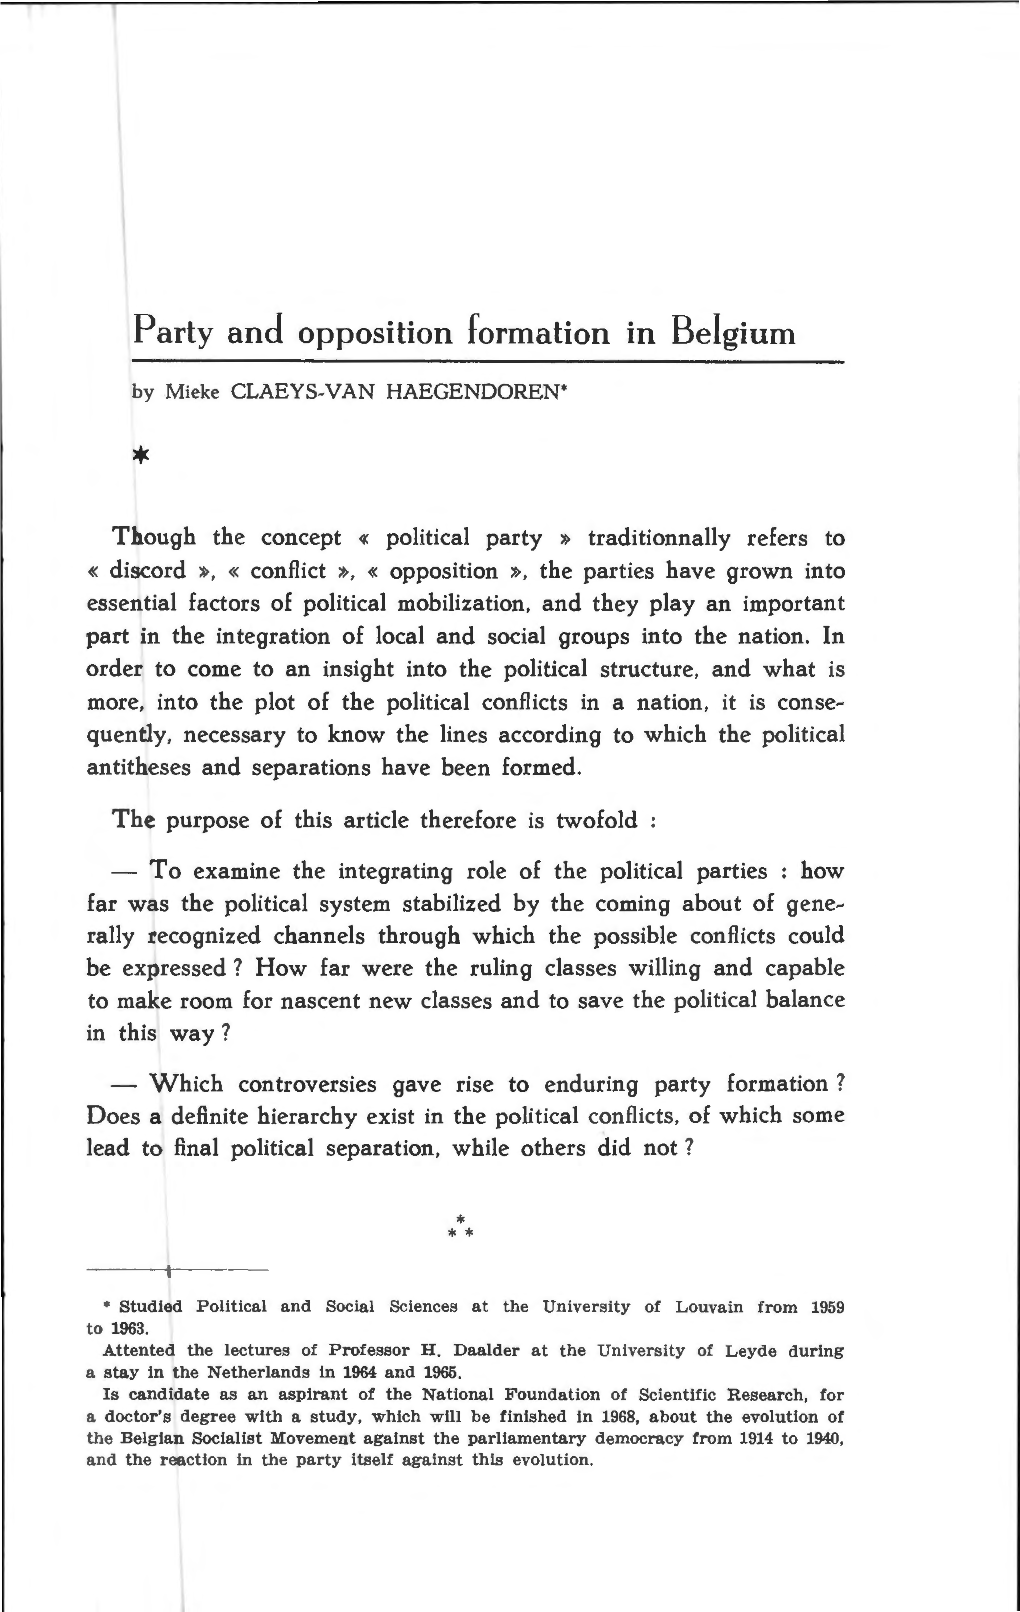 Party and Opposition Formation in Belgium